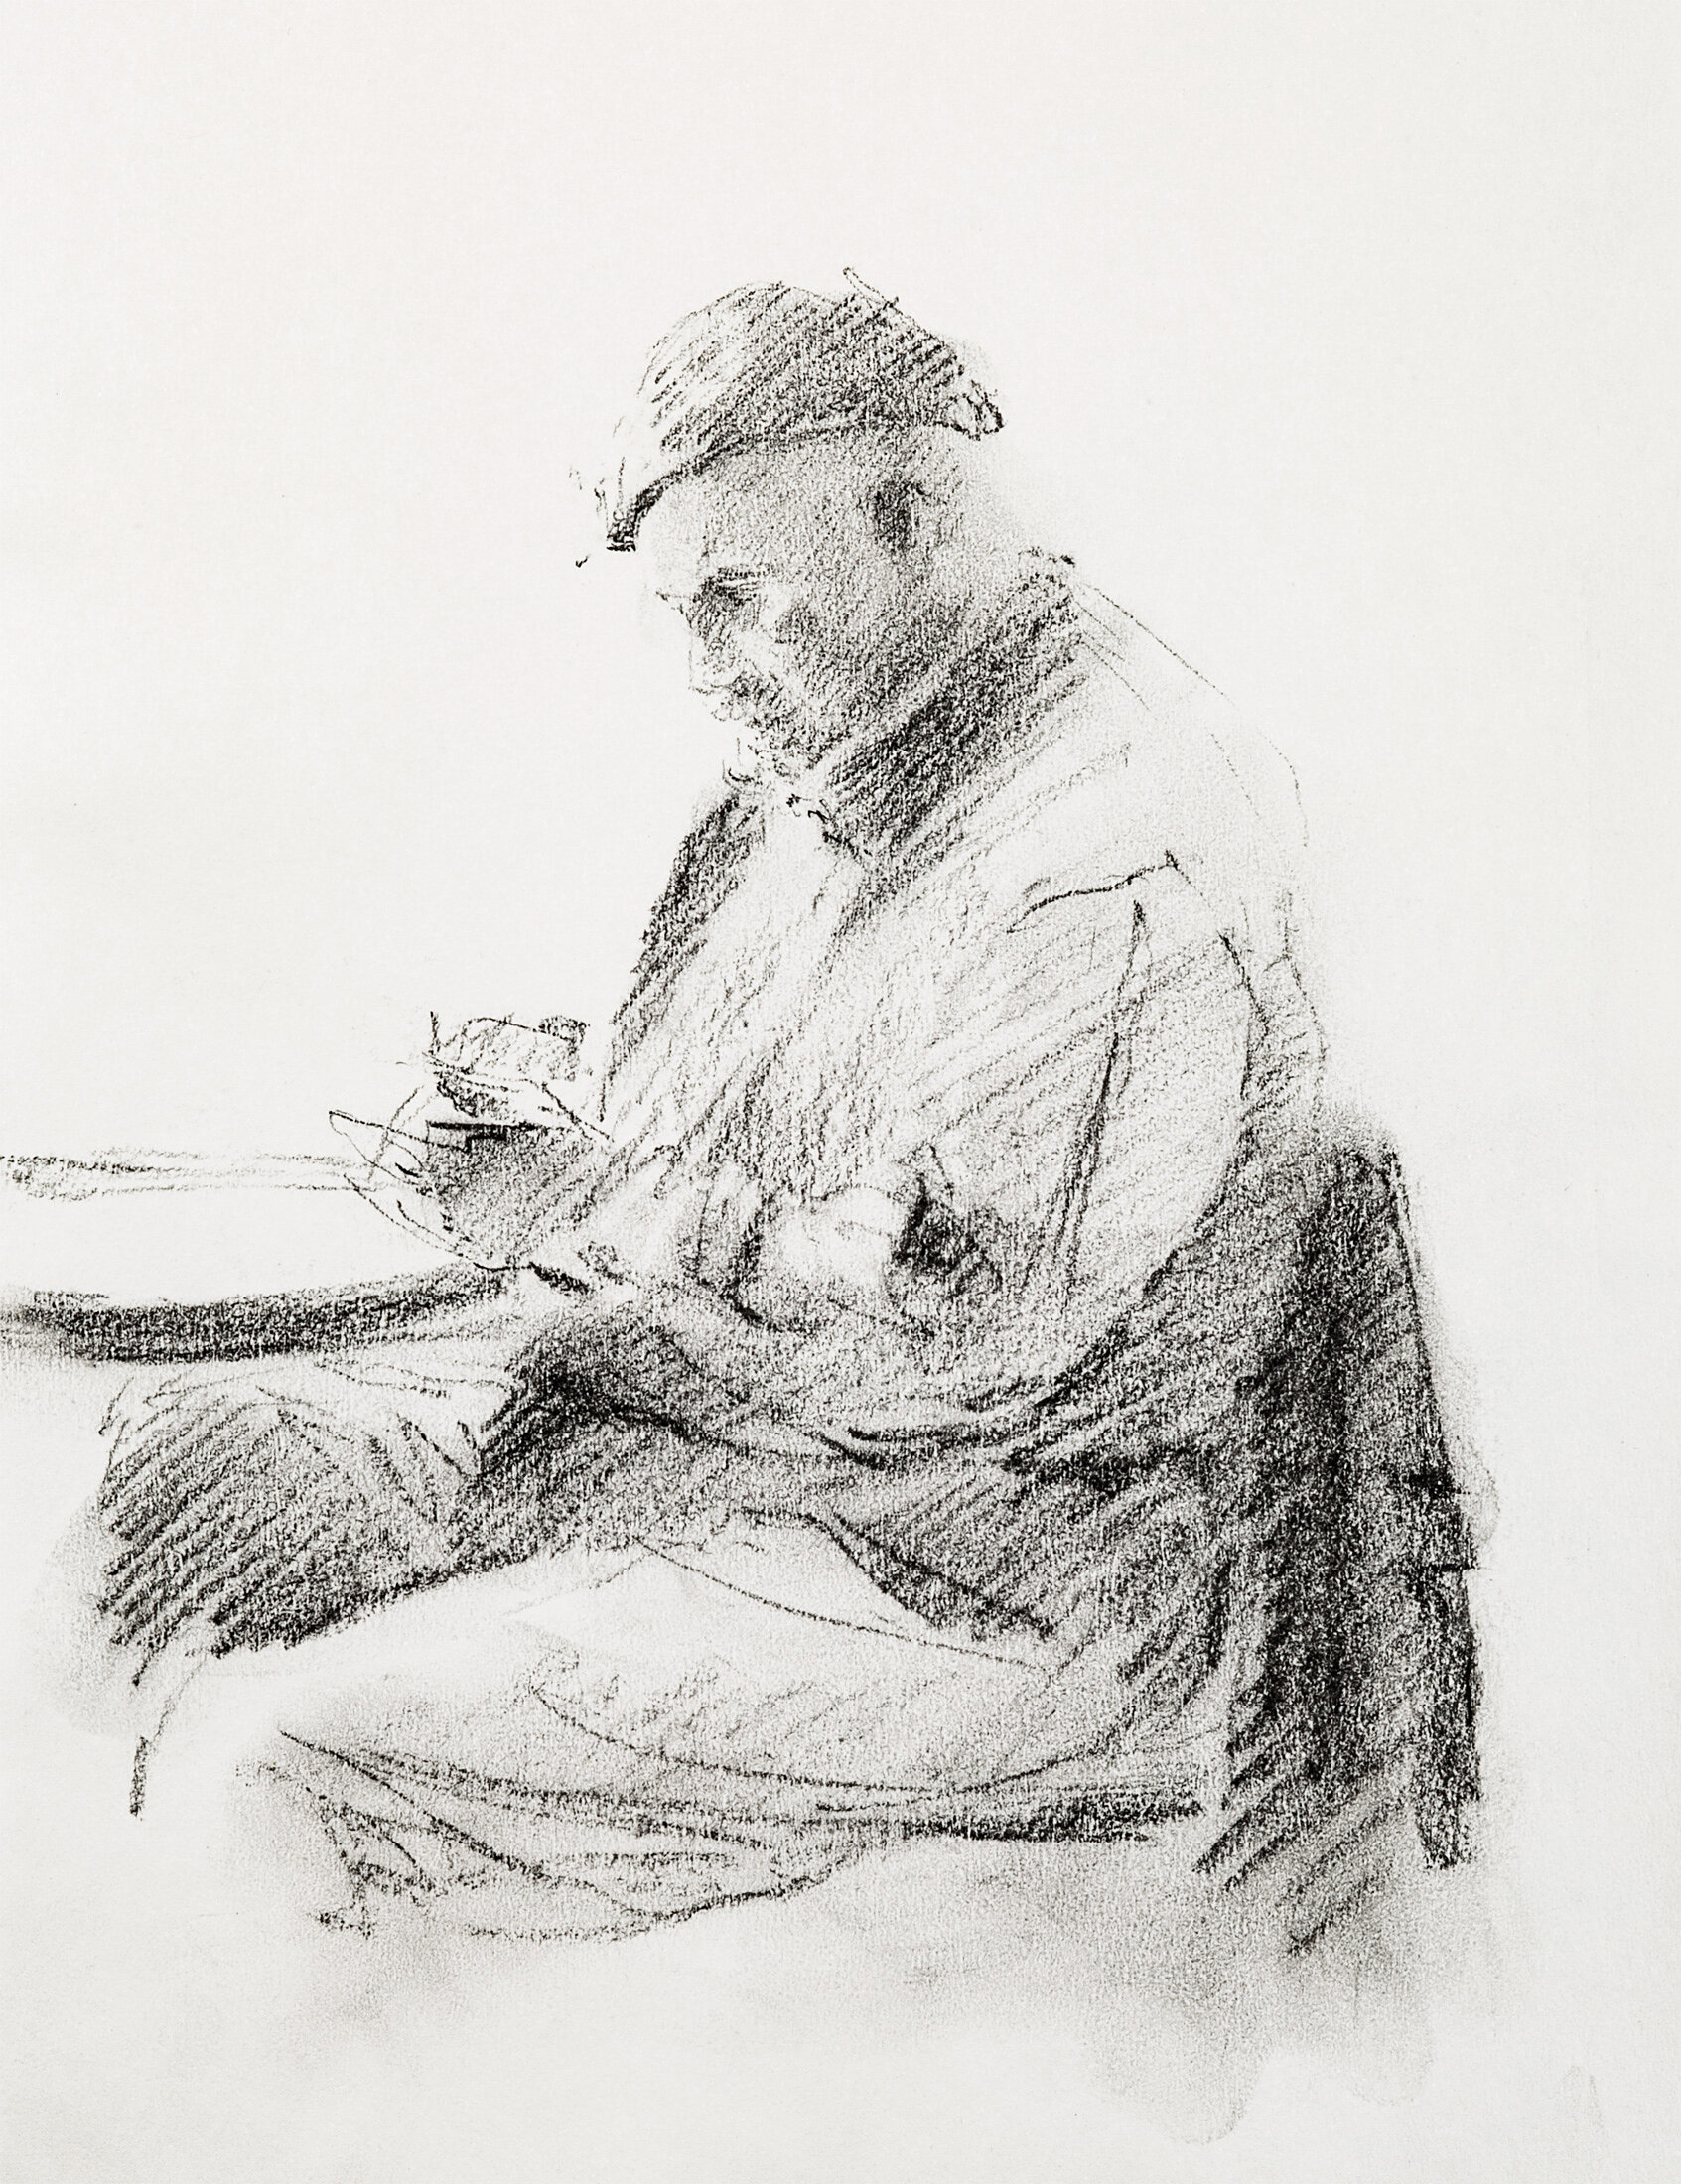 Portrait of an Old Man in a Beret, 2012 - charcoal pencil on paper